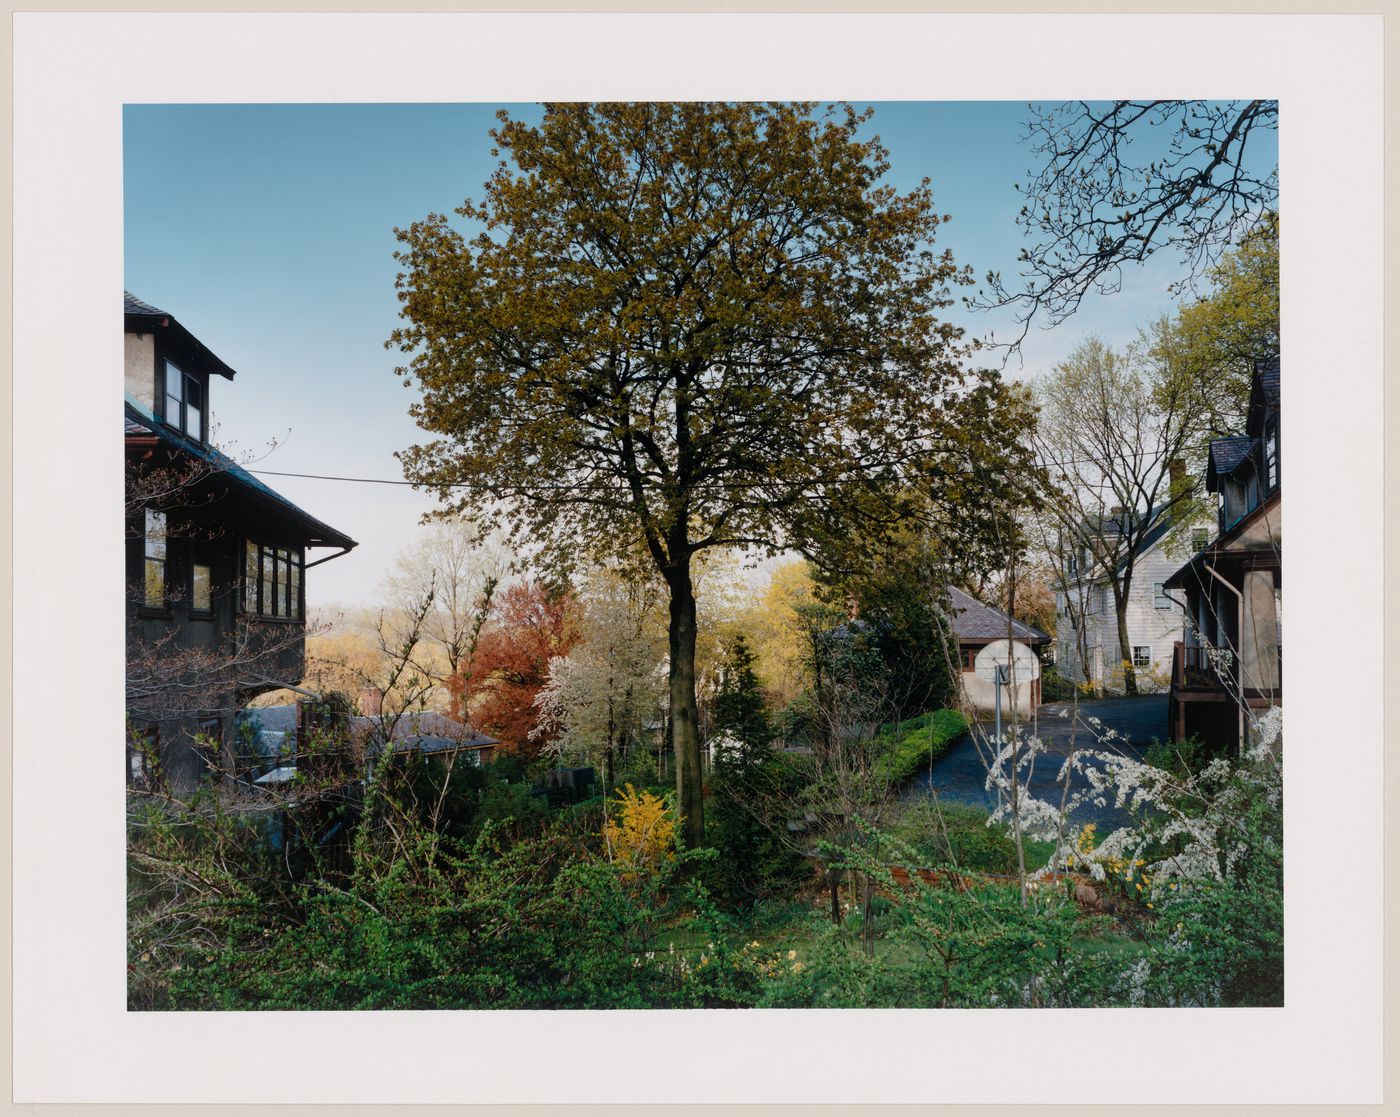 Viewing Olmsted: View of back gardens, Godard Subdivision, Fisher Hill, Brooklyn, New York